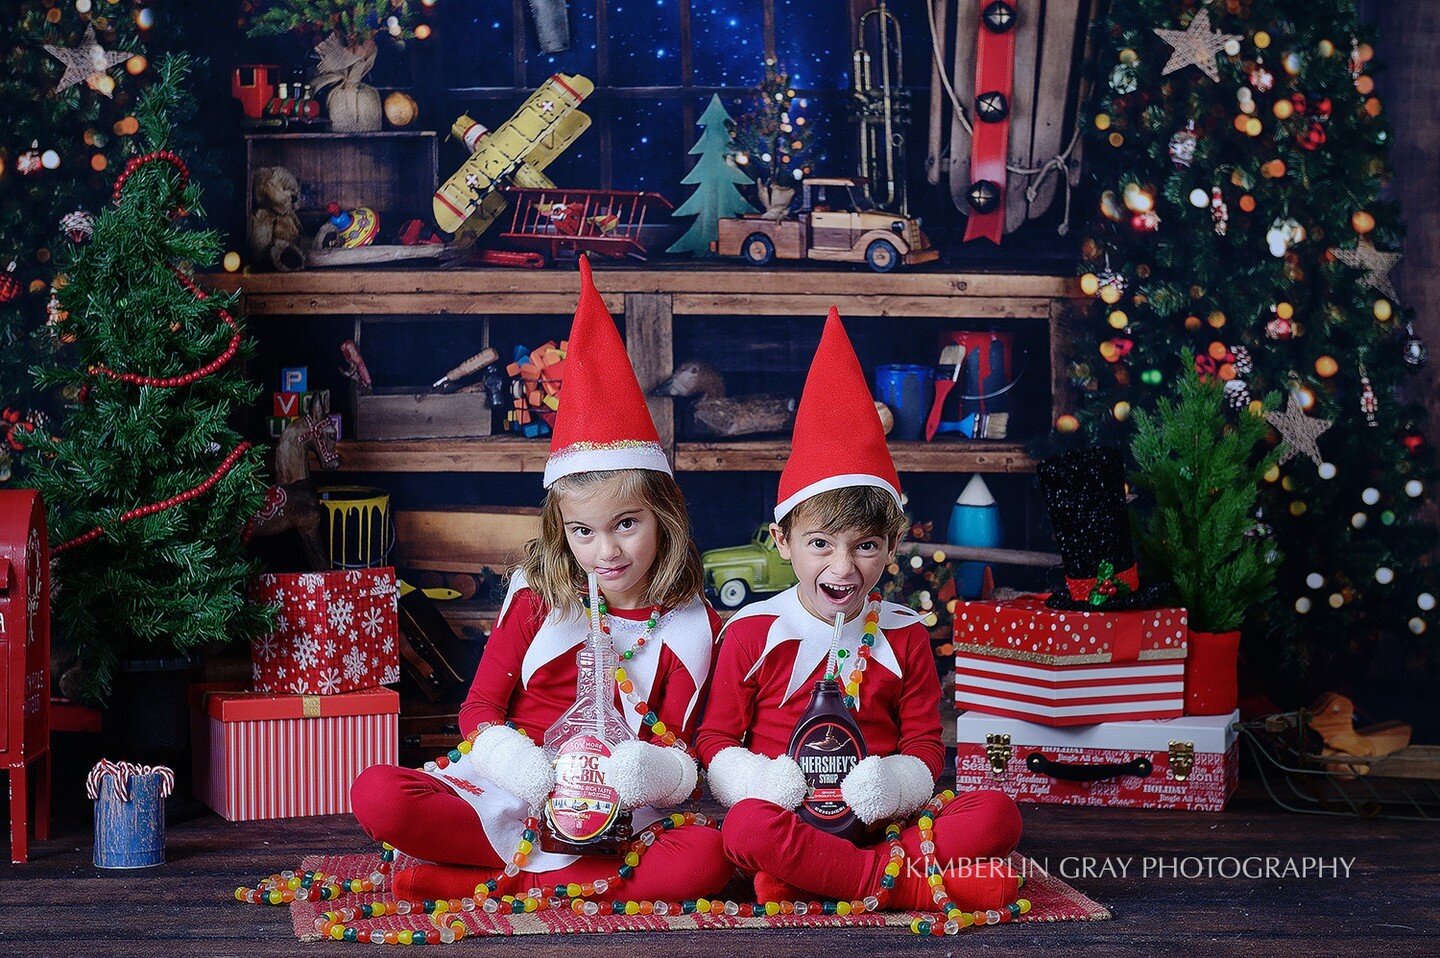 📚✨ &quot;Make this holiday season a playful one with our Naughty Elves sessions. Kids can dress as elves and experience the joy and mischief of the season. Secure your spot for a hilarious and heartwarming time! 🎄📸 #HolidayAdventures #NaughtyElves